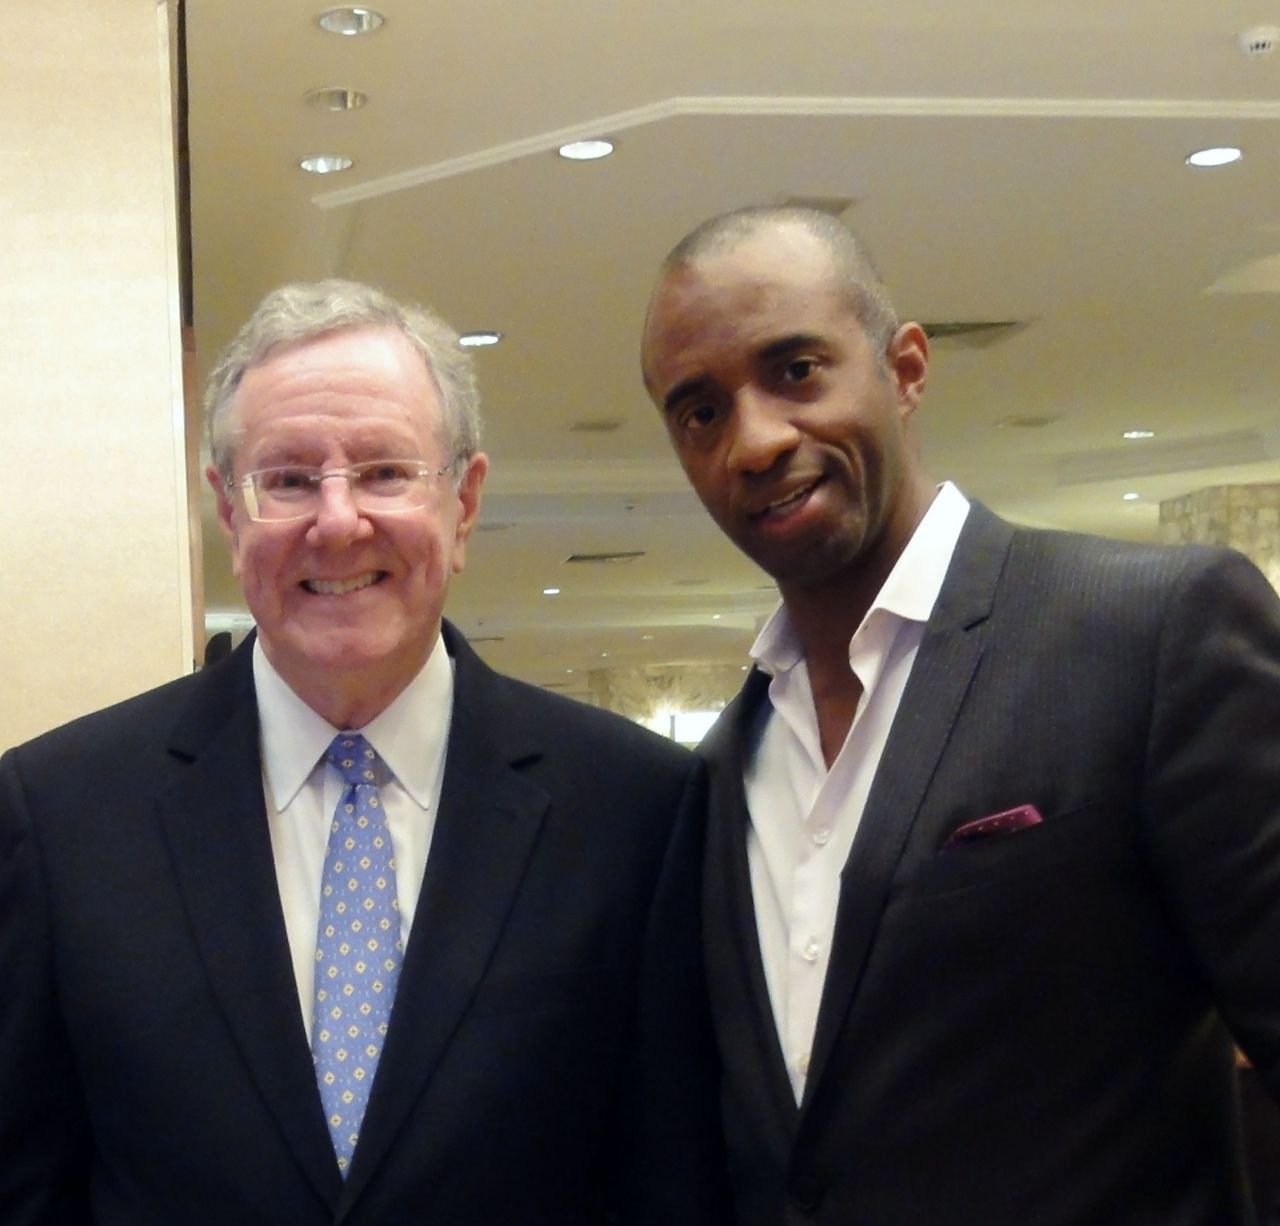 Shawn Baldwin Shawn Baldwin with Steve Forbes at the Forbes Conference